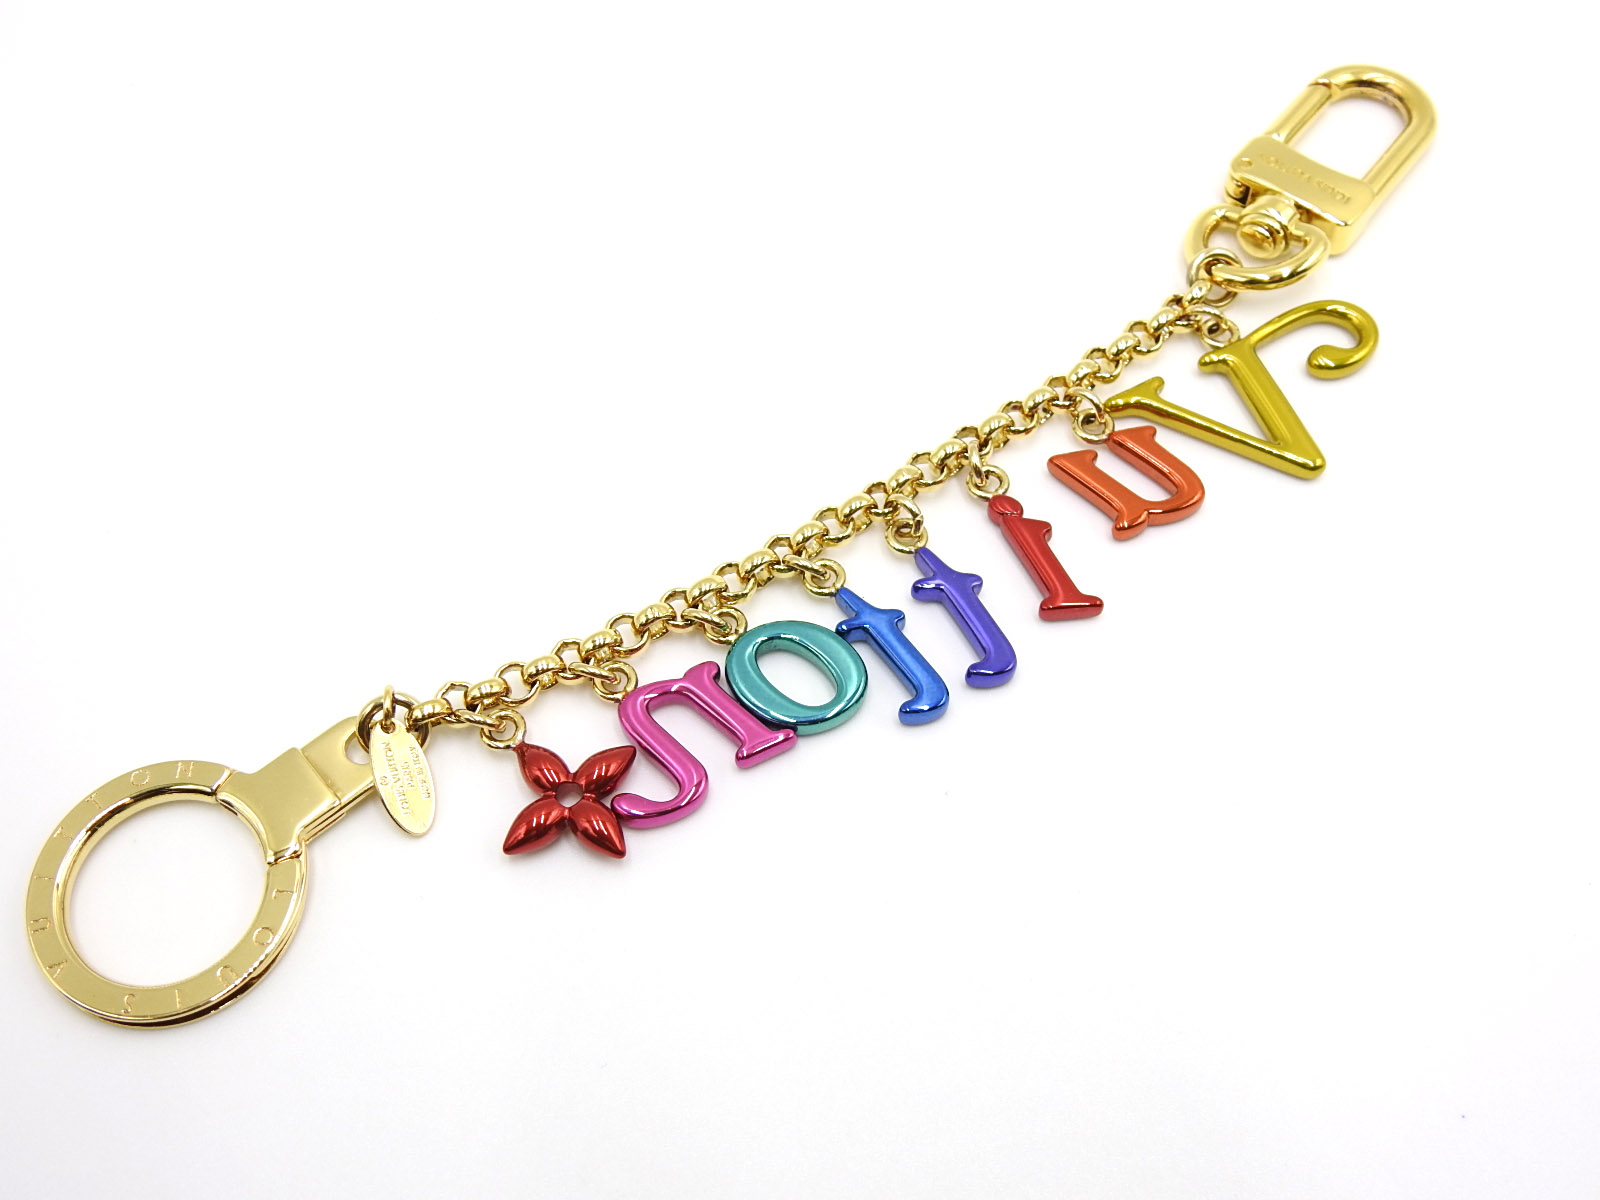 LOUIS VUITTON Porte Cles Chaine New Wave Key Holder Ring Charm Gold M63748 V2012 | eBay